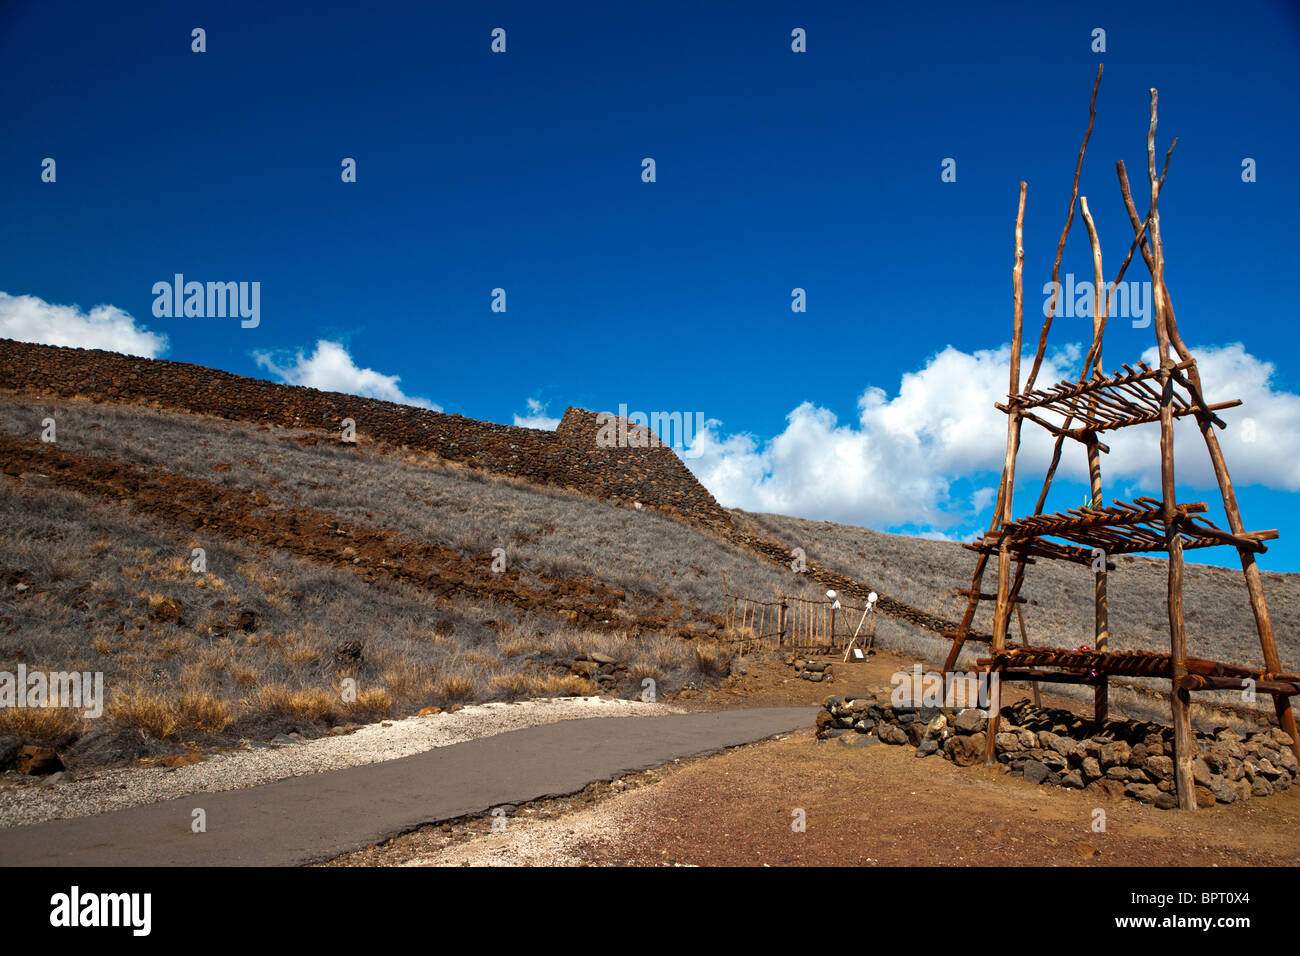 Wooden stand outside of temple, Pu'ujohola Heiau National Historic Site, The Big Island, Hawaii, United States of America Stock Photo